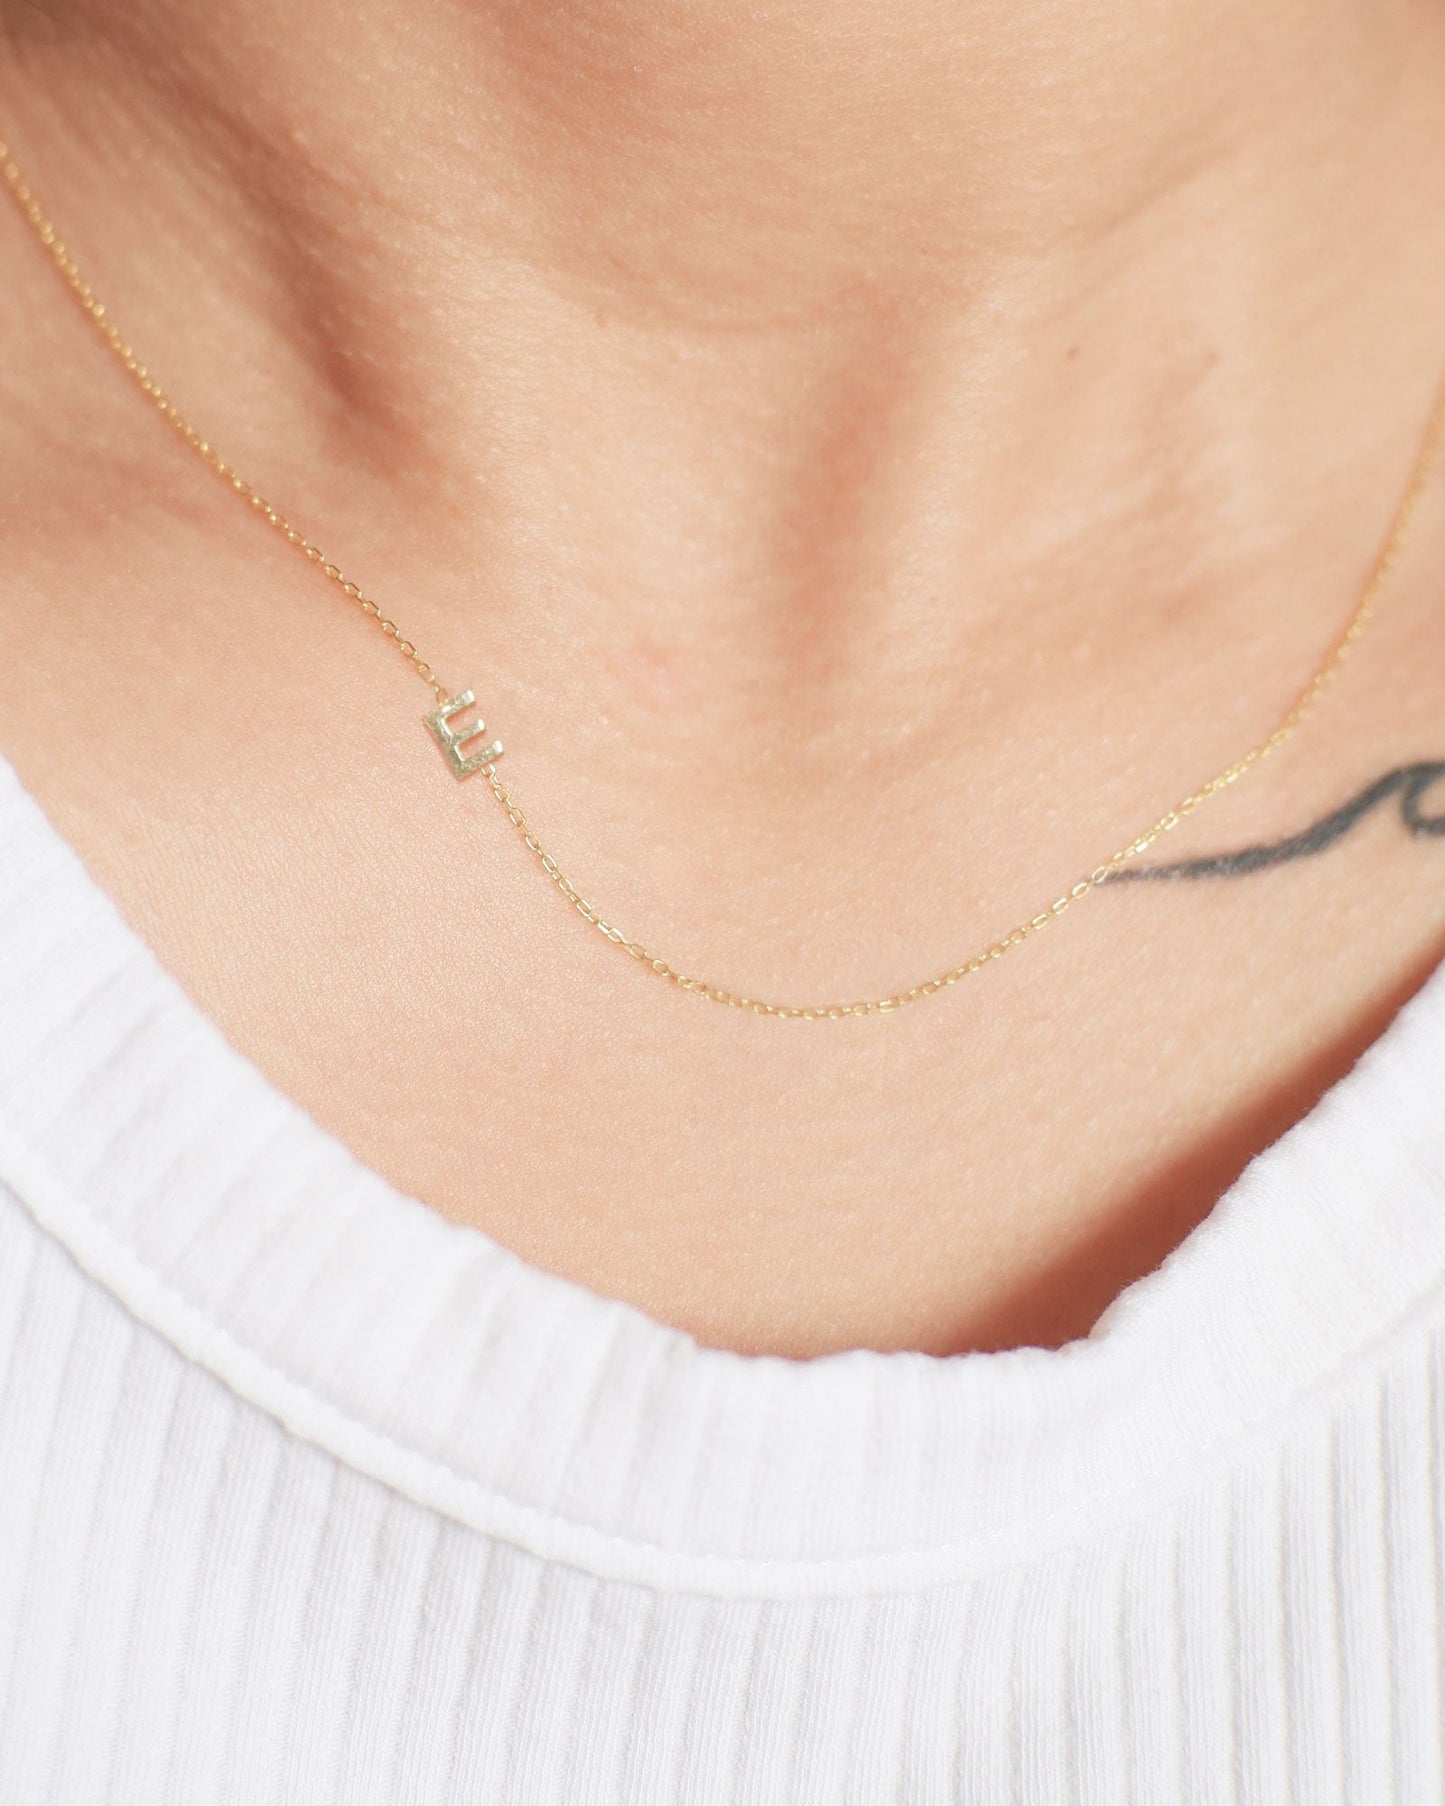 The Centered or Sideways Initial Necklace in Solid Gold